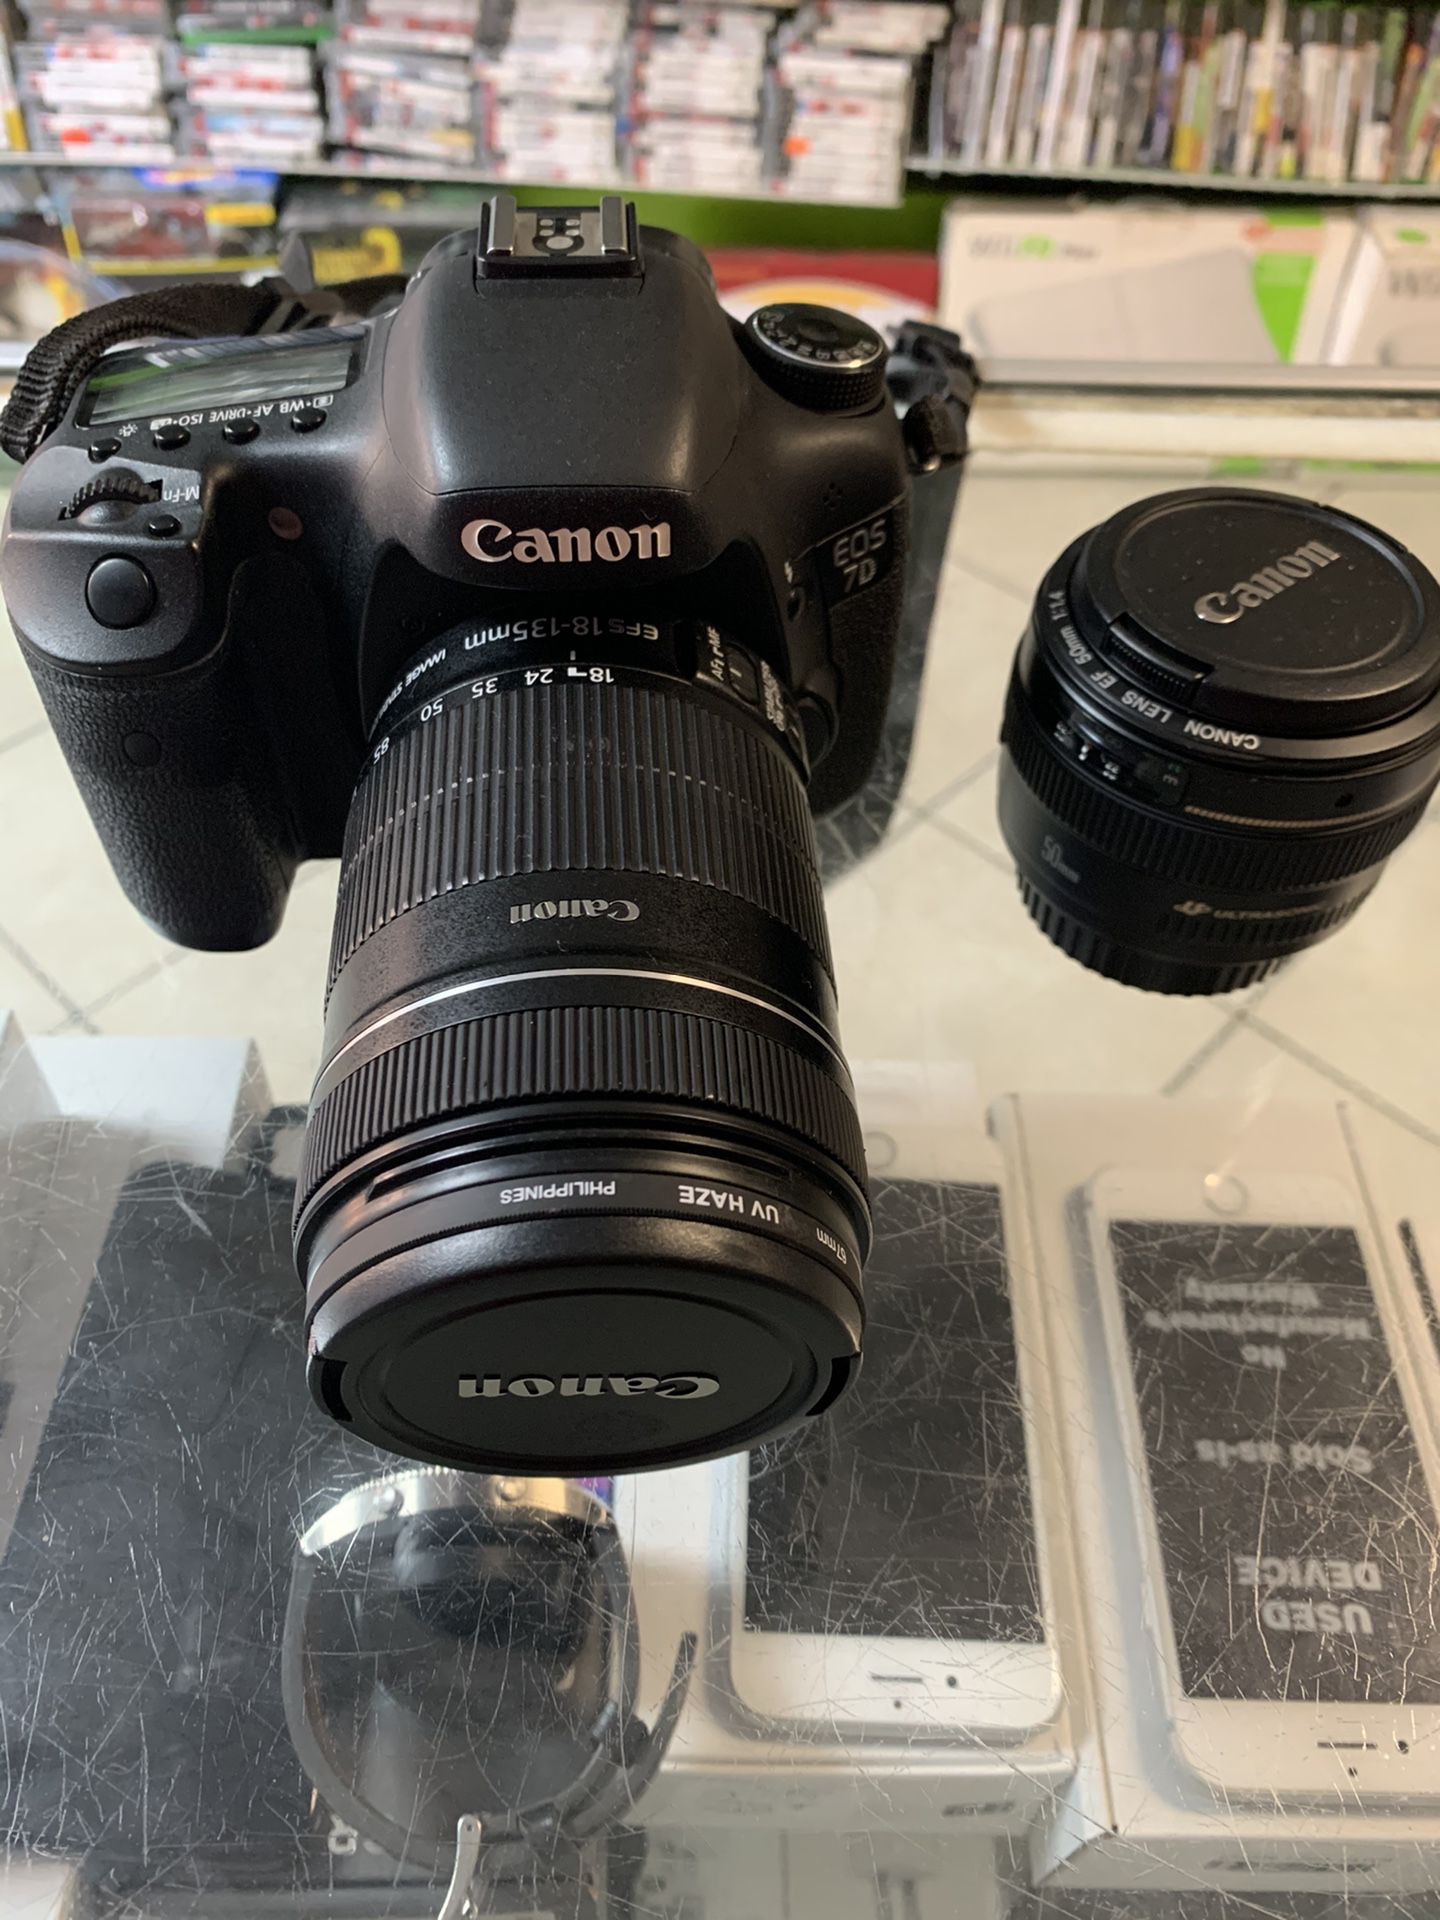 Canon EO5 7D used